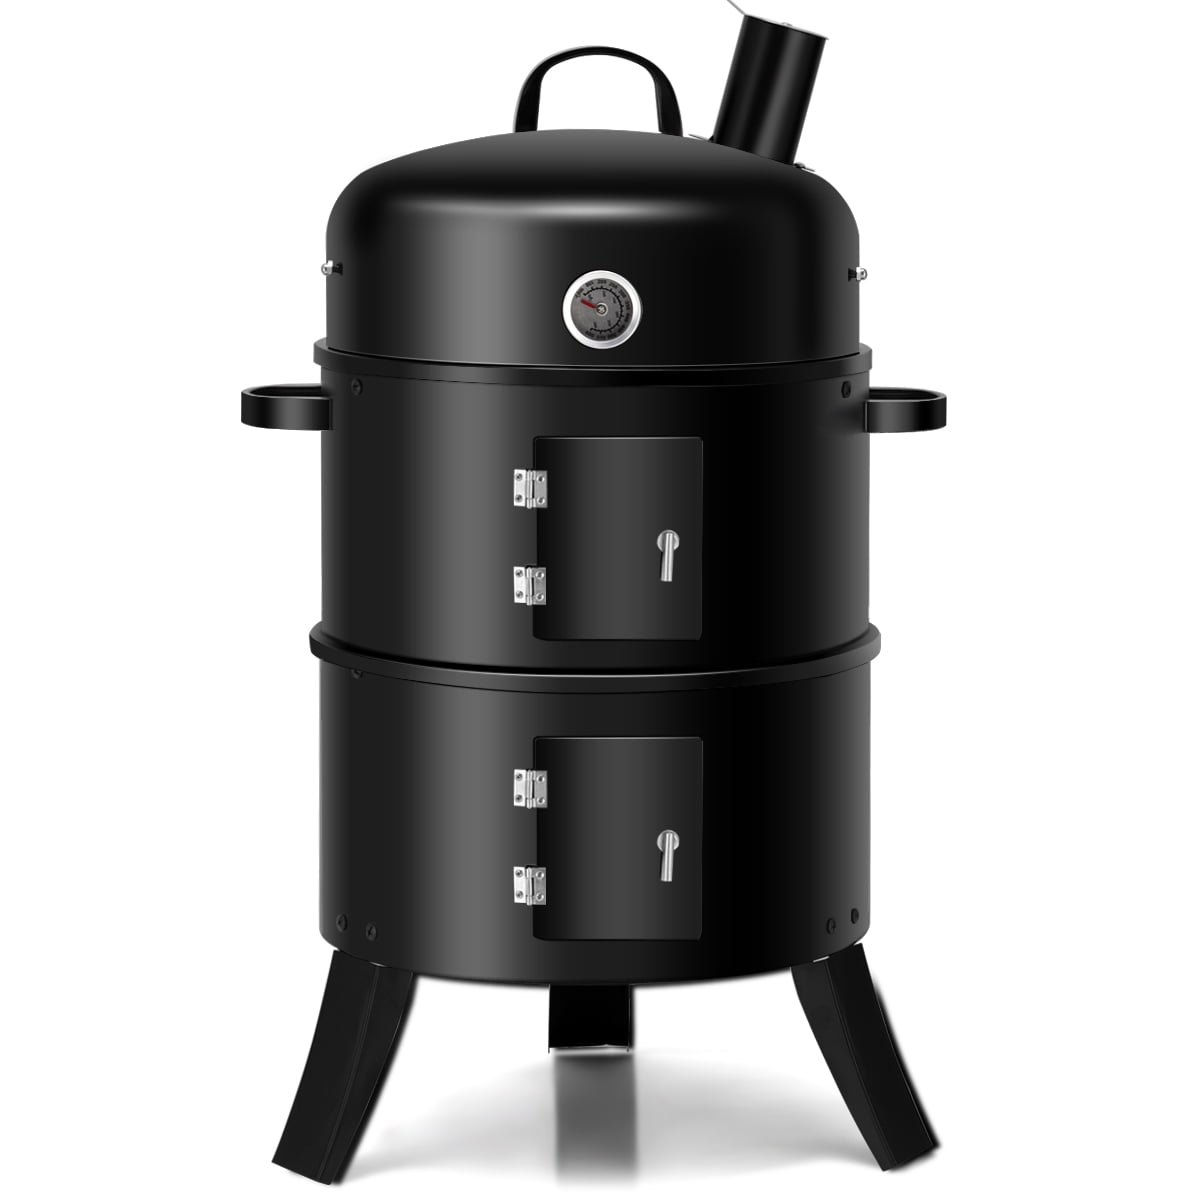 BBQ Grill Smoker Plans DIY Portable Camping Barbecue Cooker Outdoor Cooking